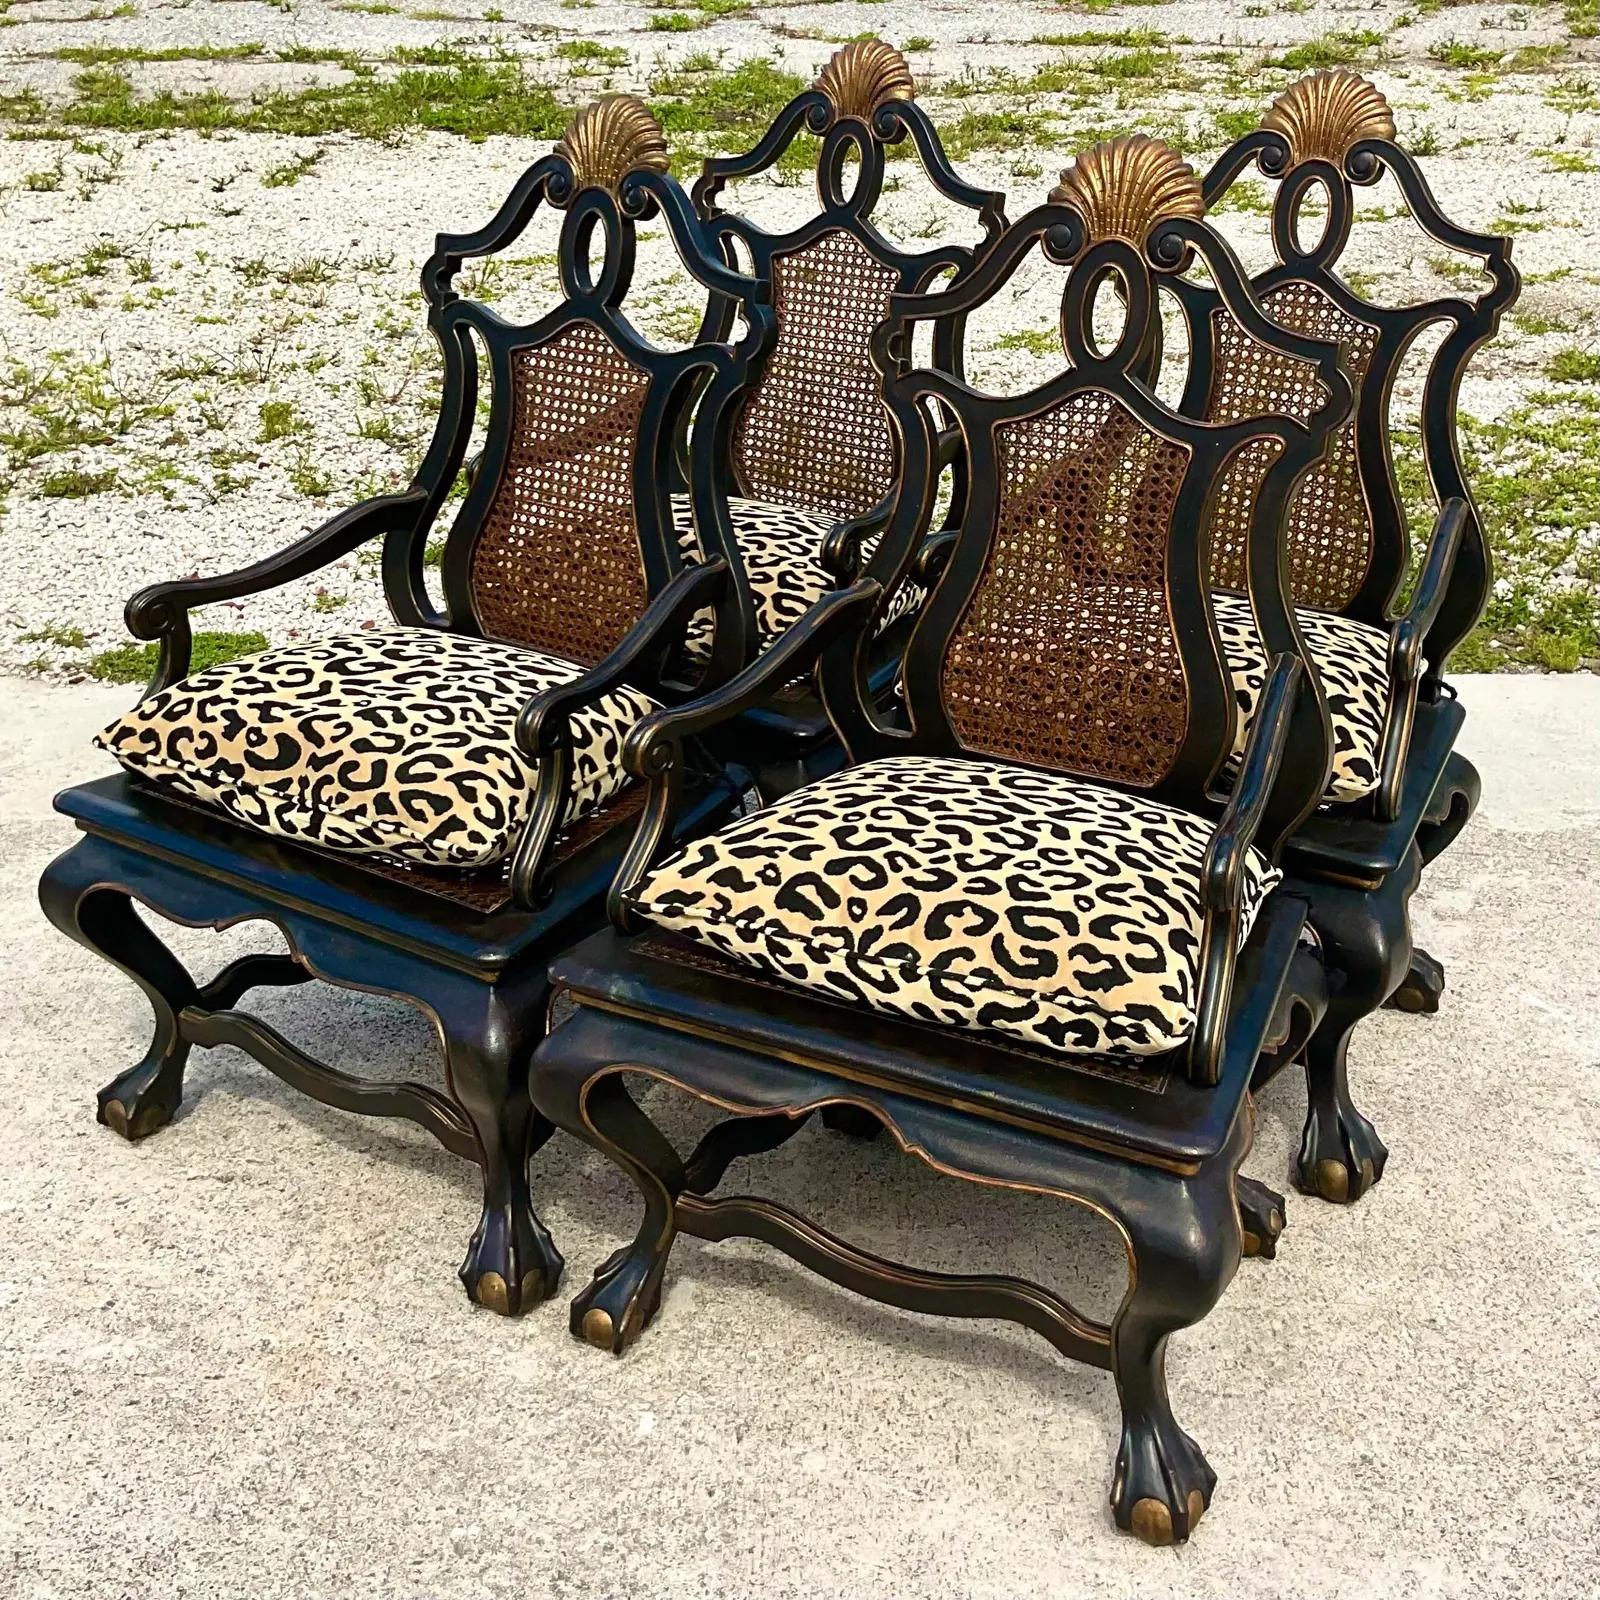 Incredible set of four monumental cane chairs. Monumental in size and drama. Over scaled with black lacquer finish and gilt tipping detail. Inset cane seat and back. Loose velvet leopard seat chariots with tassel ties. Acquired from a Palm Beach